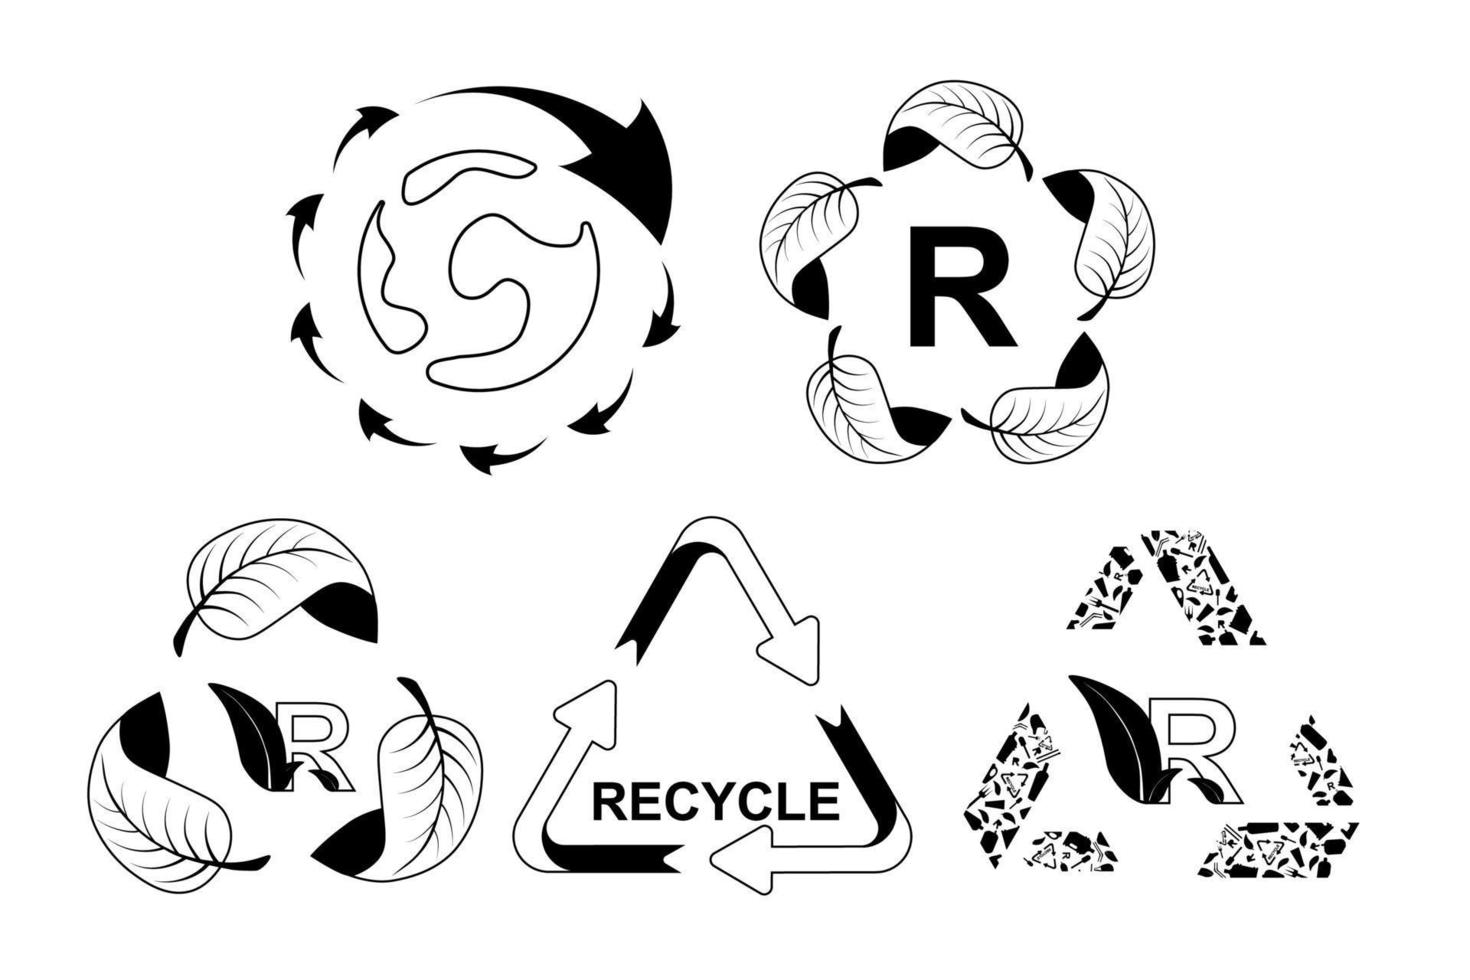 recycling symbols. environmental symbols in the circle and triangle from a plants vector